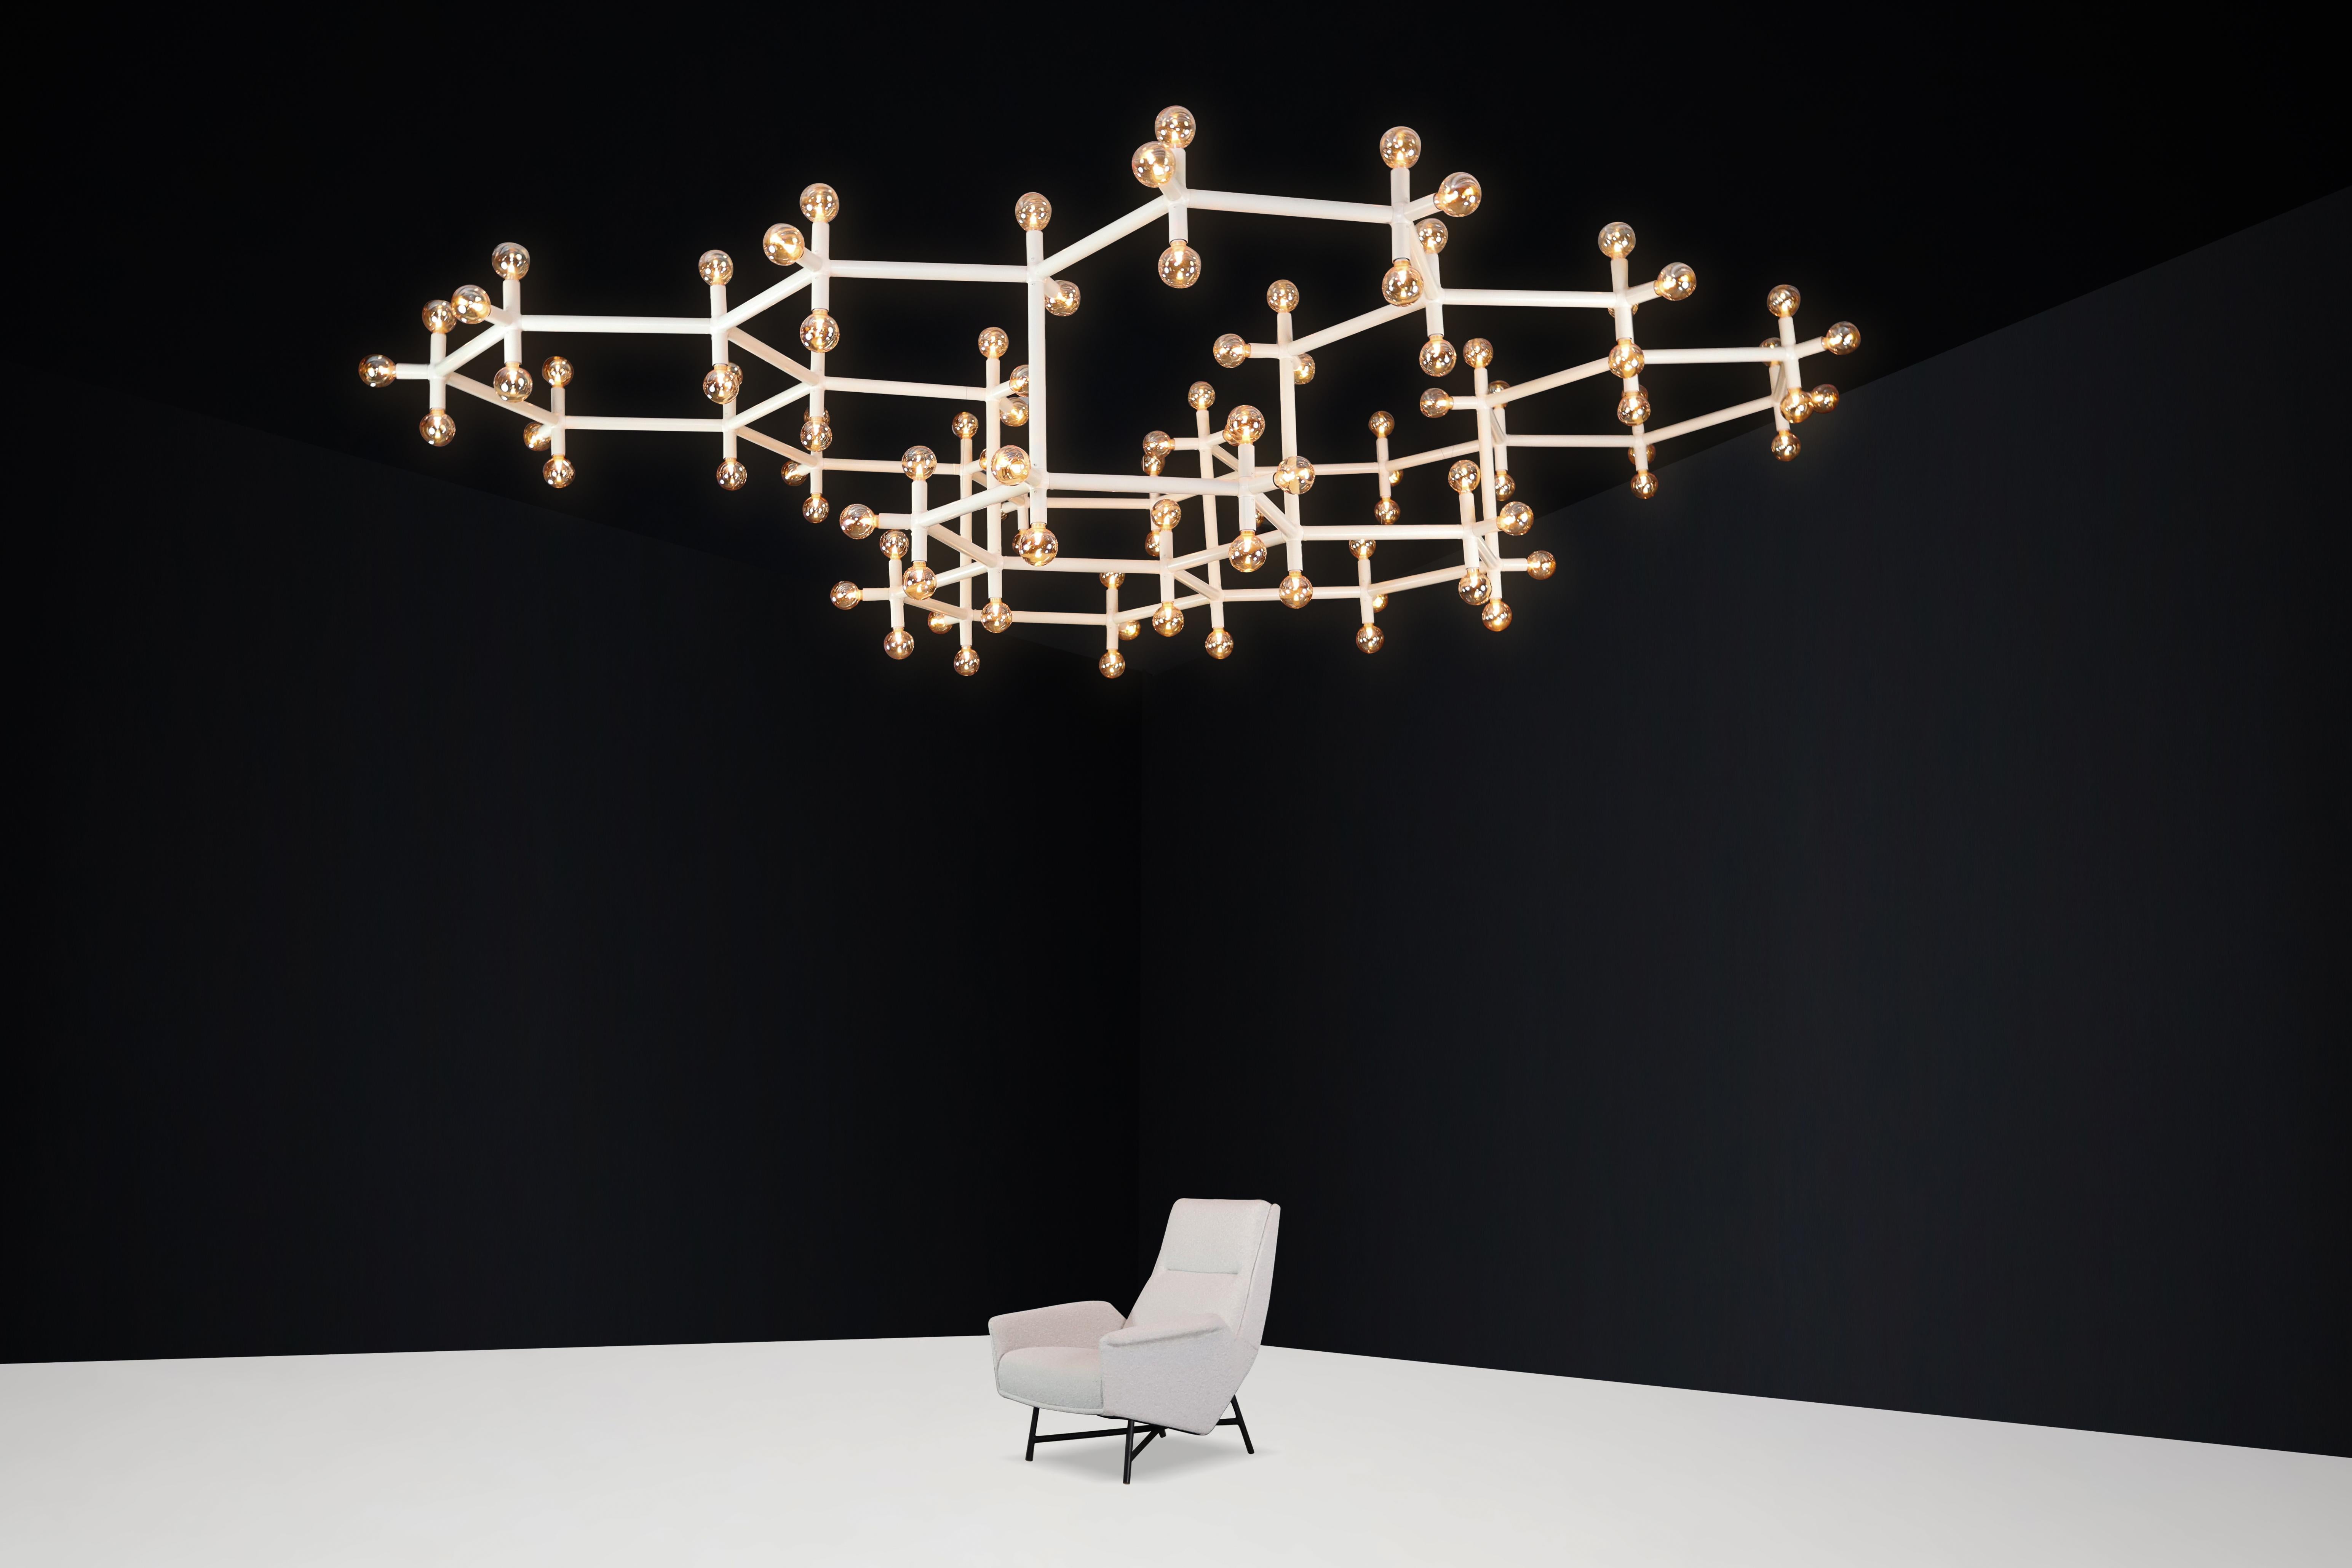 Robert Haussmann monumental atomic suspension chandelier, Switzerland, 1970s.

Monumental atomic suspension chandelier was designed by Robert and Trix Haussmann and manufactured by Swiss lamp, Switzerland, in the 1970s. The lamp is executed with